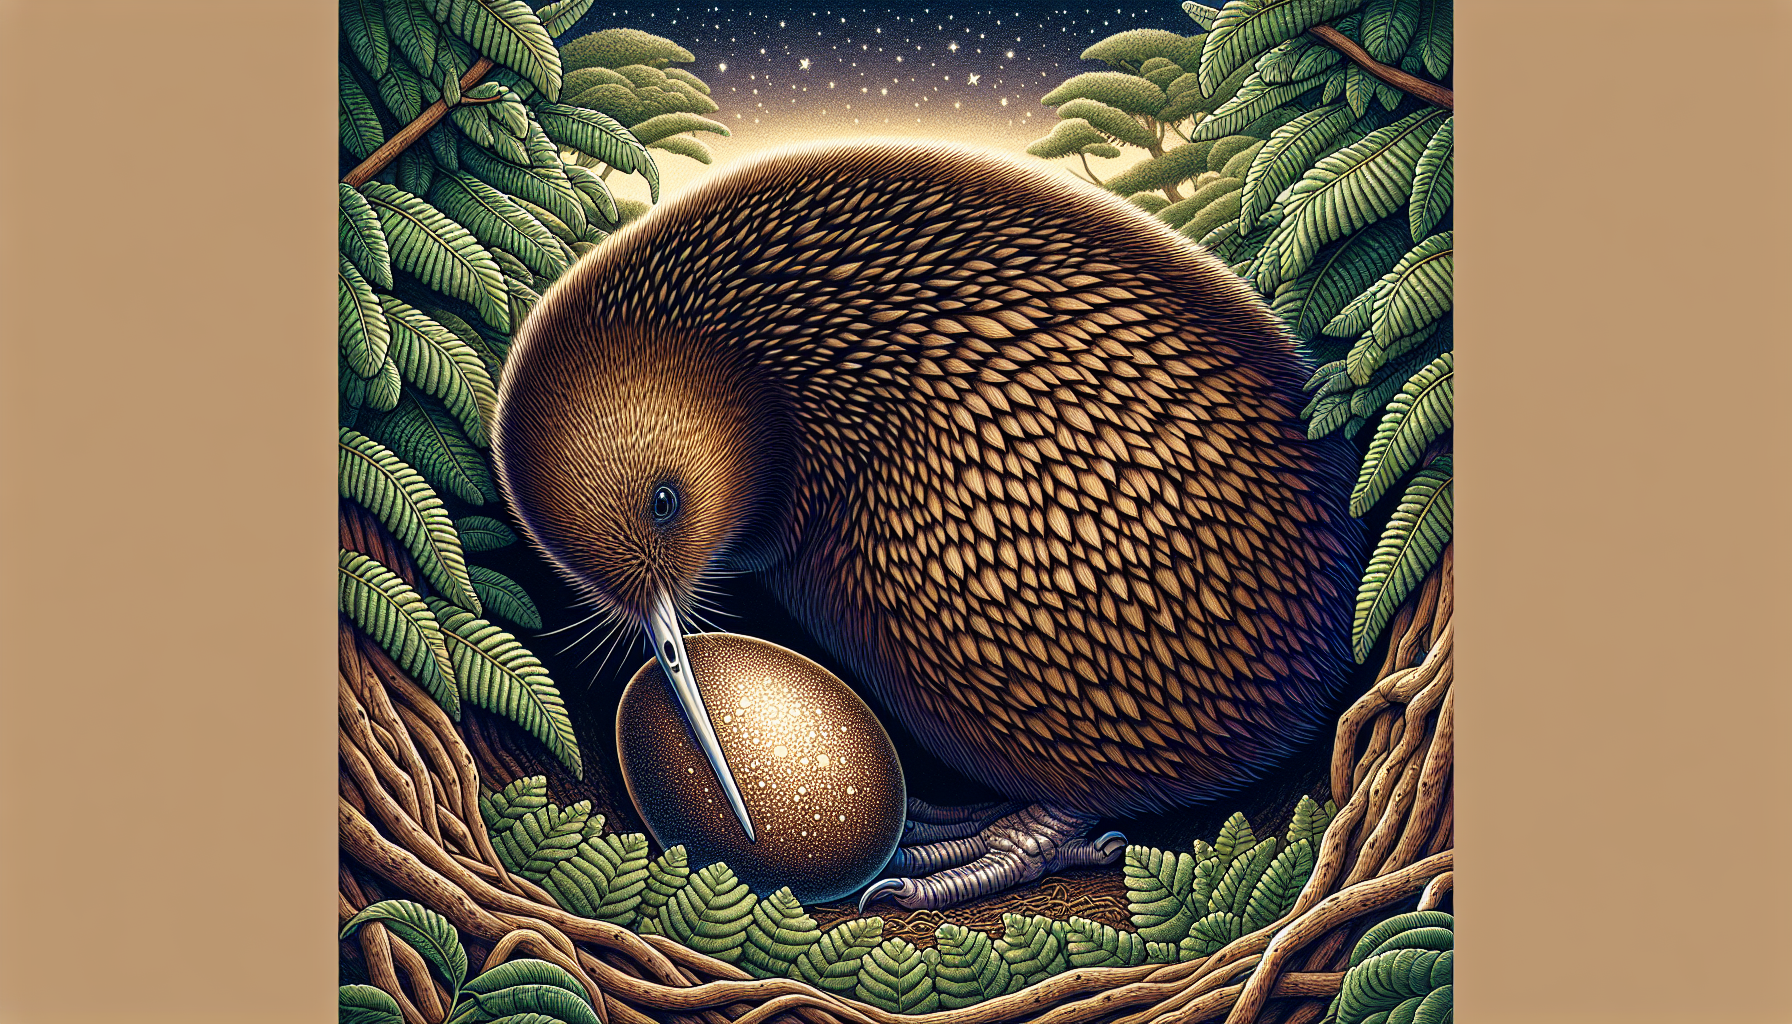 Illustration of a male kiwi incubating a large egg in a nesting burrow